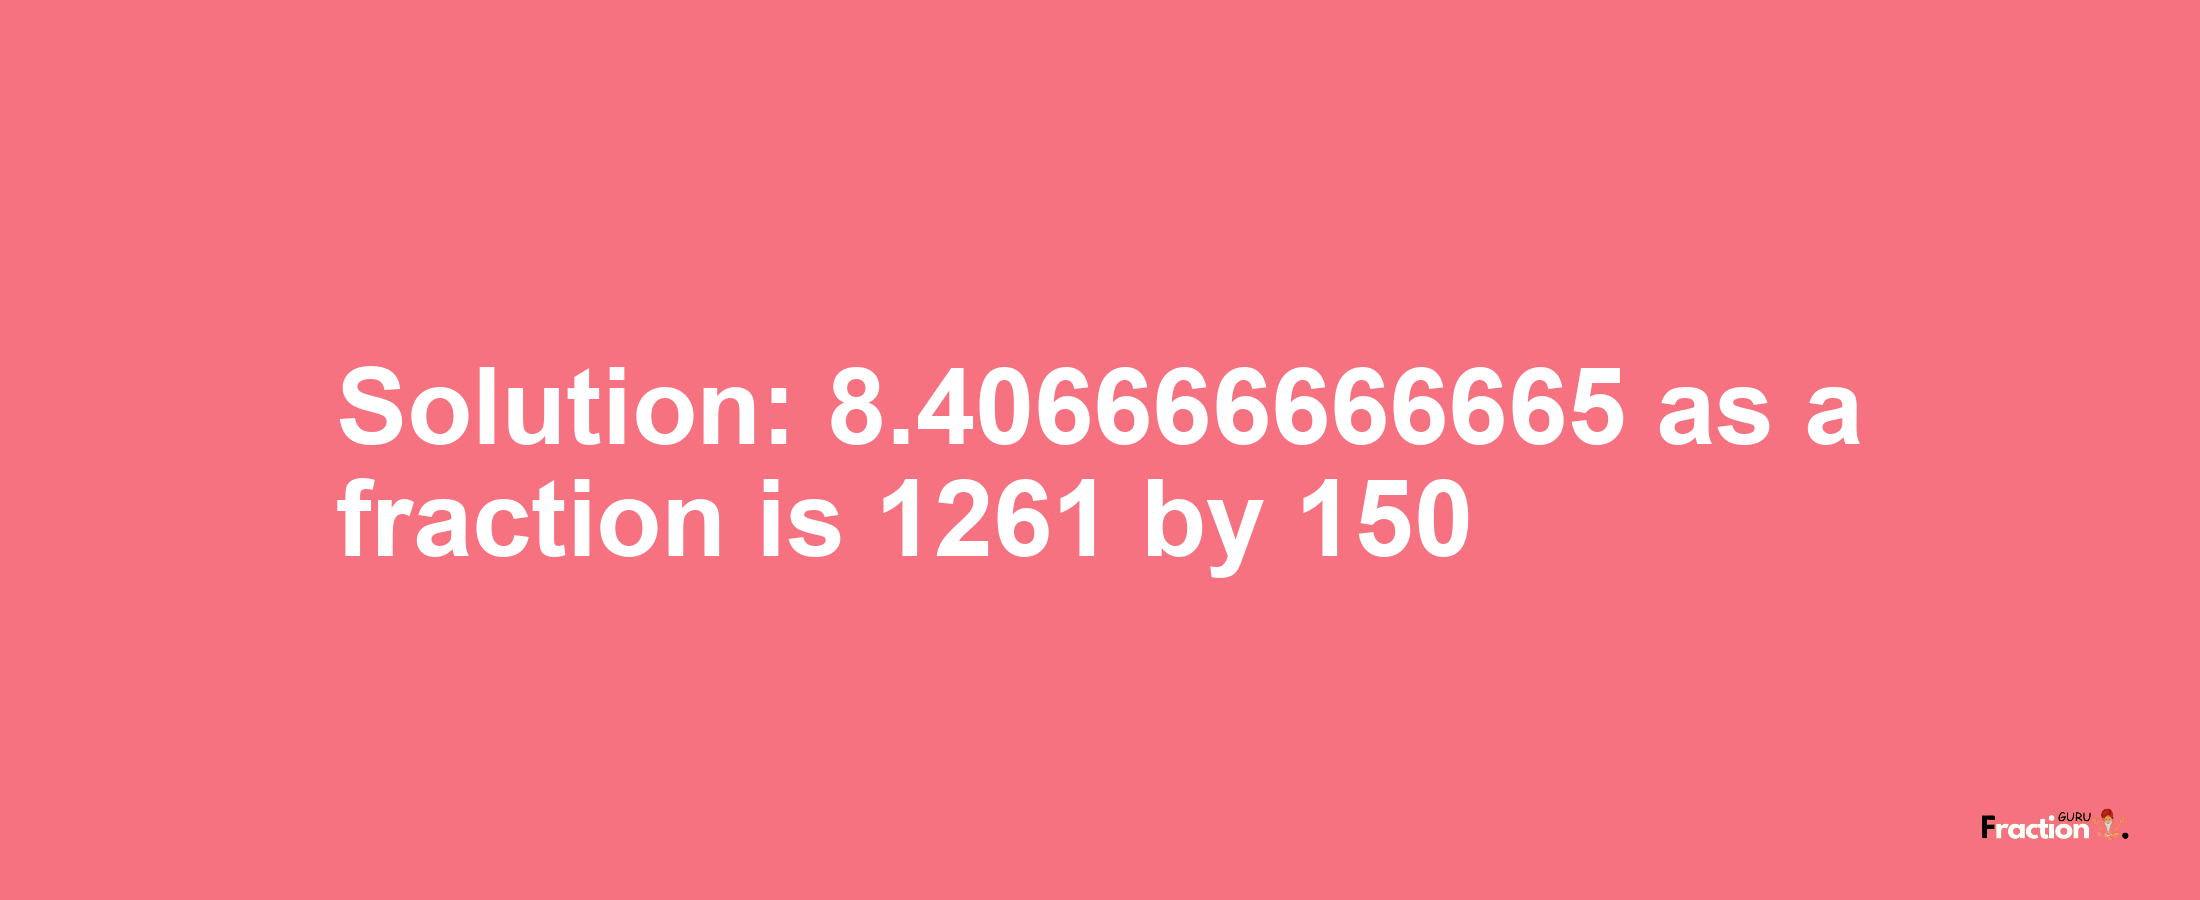 Solution:8.406666666665 as a fraction is 1261/150